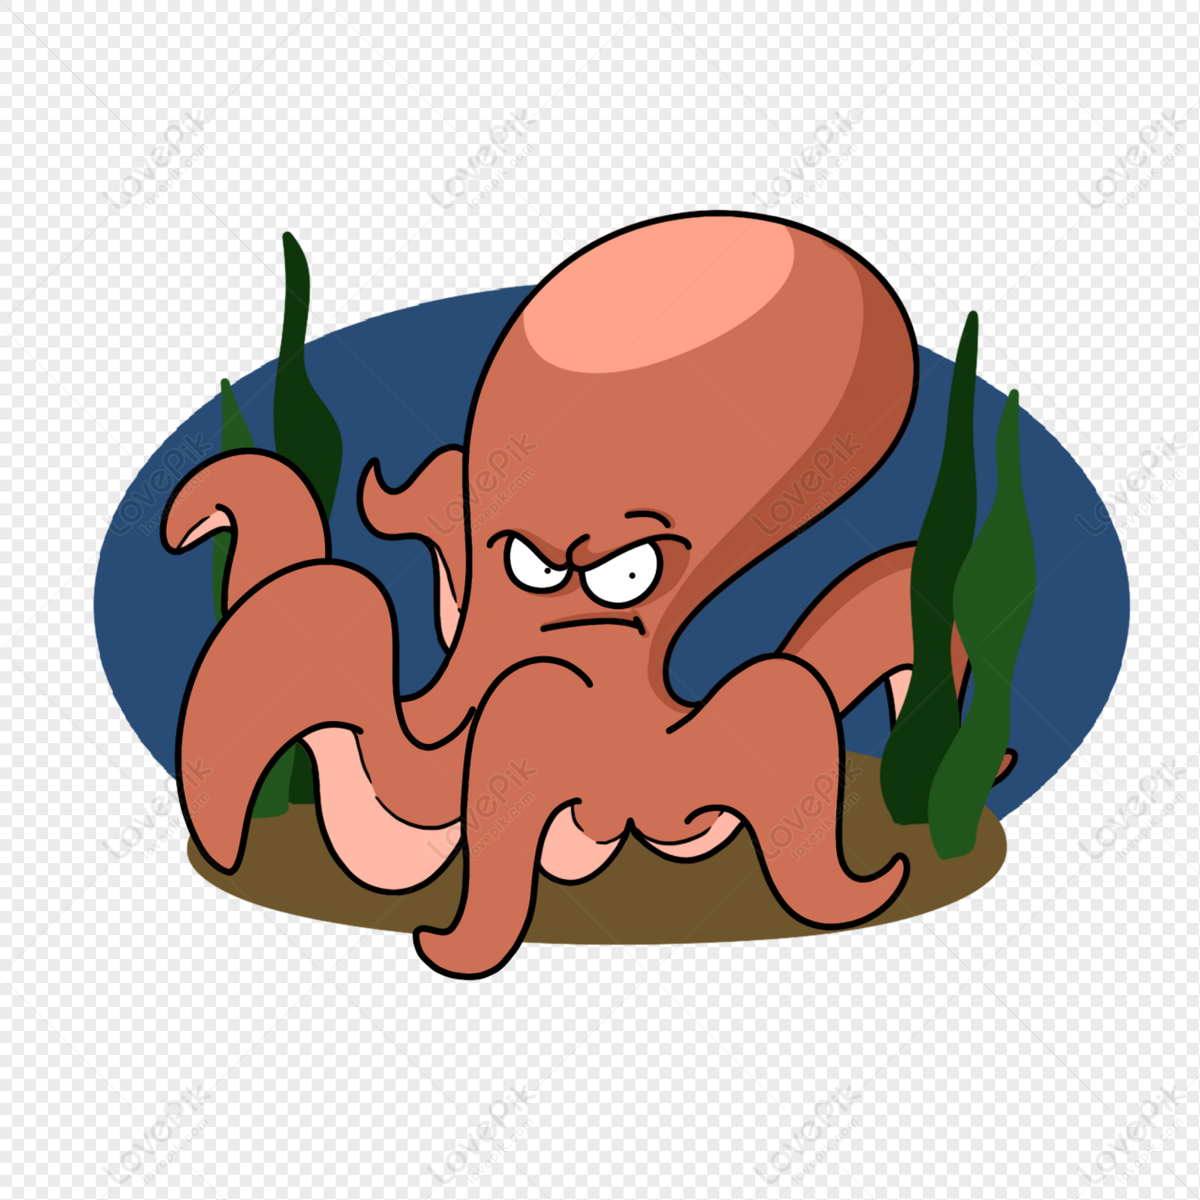 Cartoon Sea Octopus PNG Picture And Clipart Image For Free Download -  Lovepik | 401457055